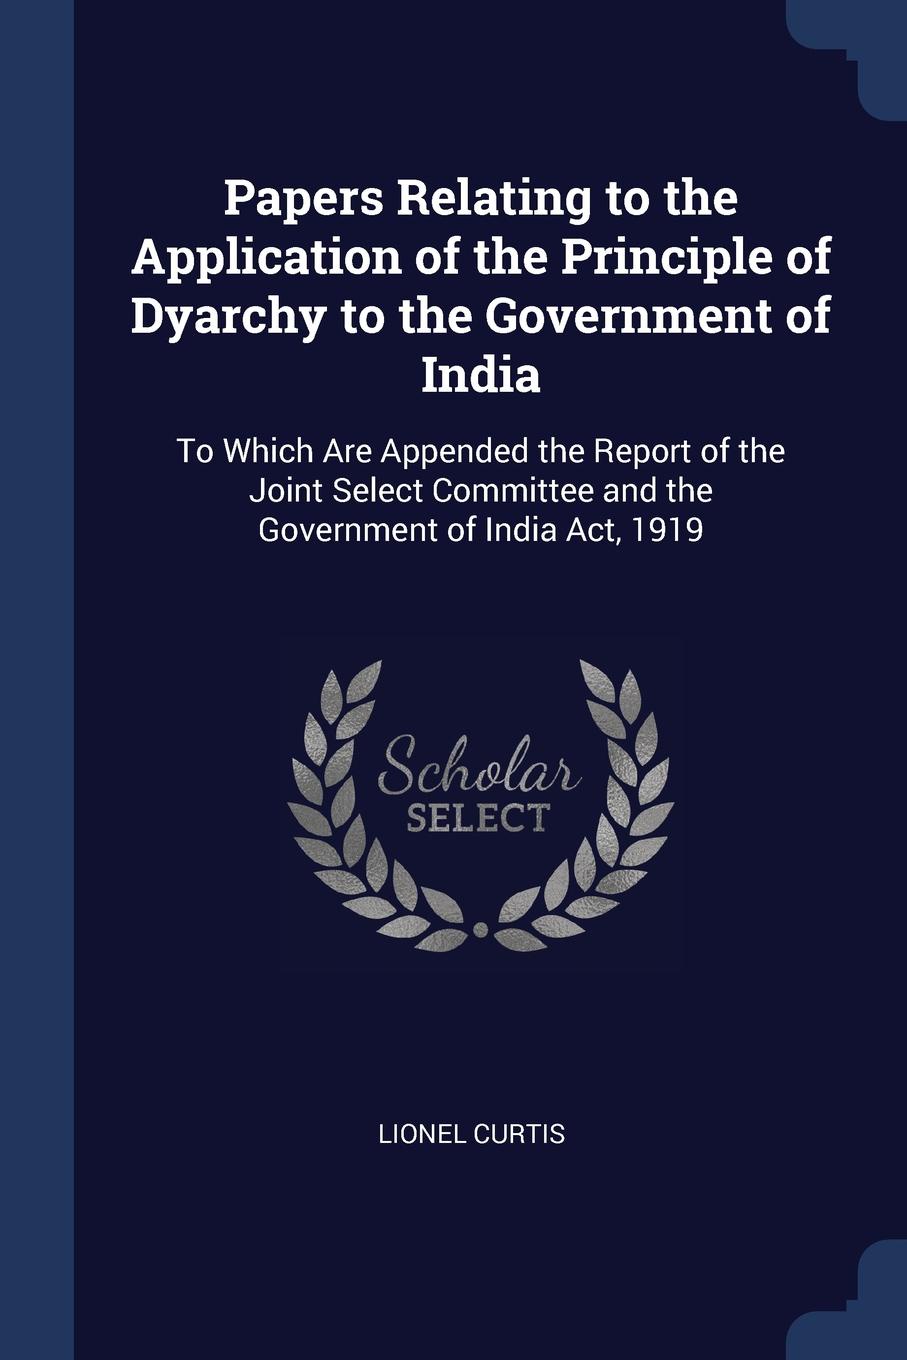 Papers Relating to the Application of the Principle of Dyarchy to the Government of India. To Which Are Appended the Report of the Joint Select Committee and the Government of India Act, 1919